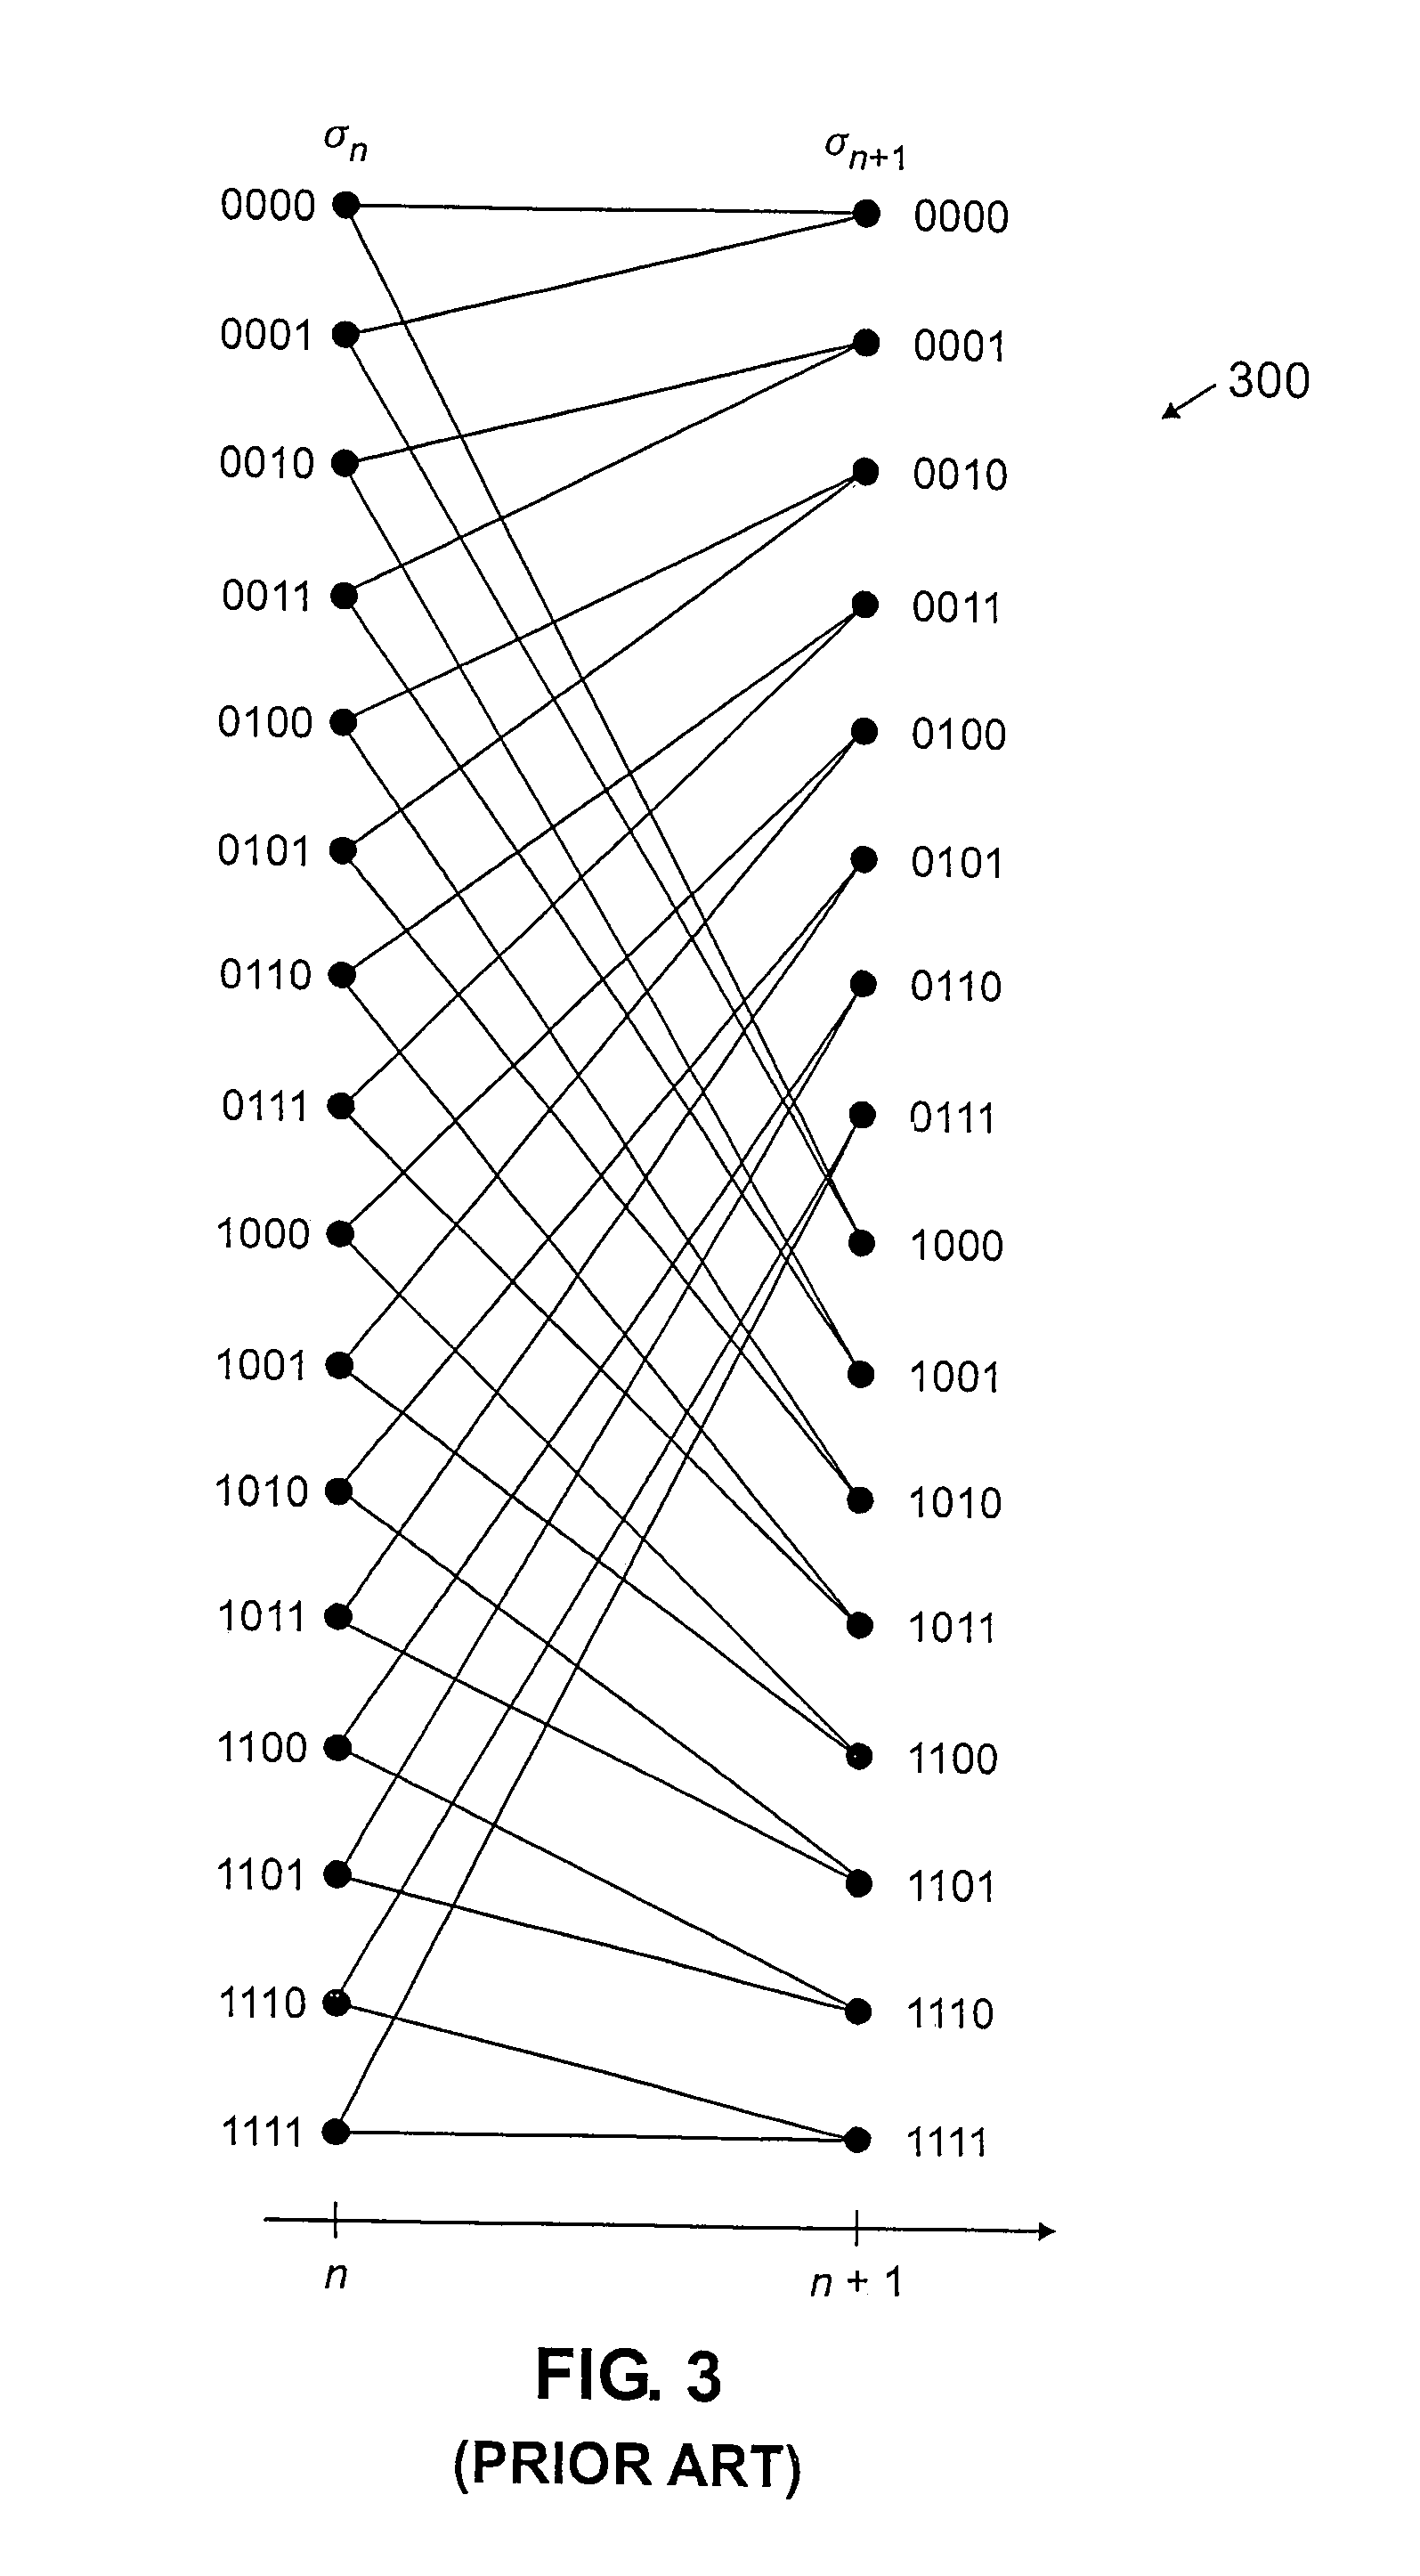 Method and apparatus for precomputation and pipelined selection of branch metrics in a reduced-state Viterbi detector